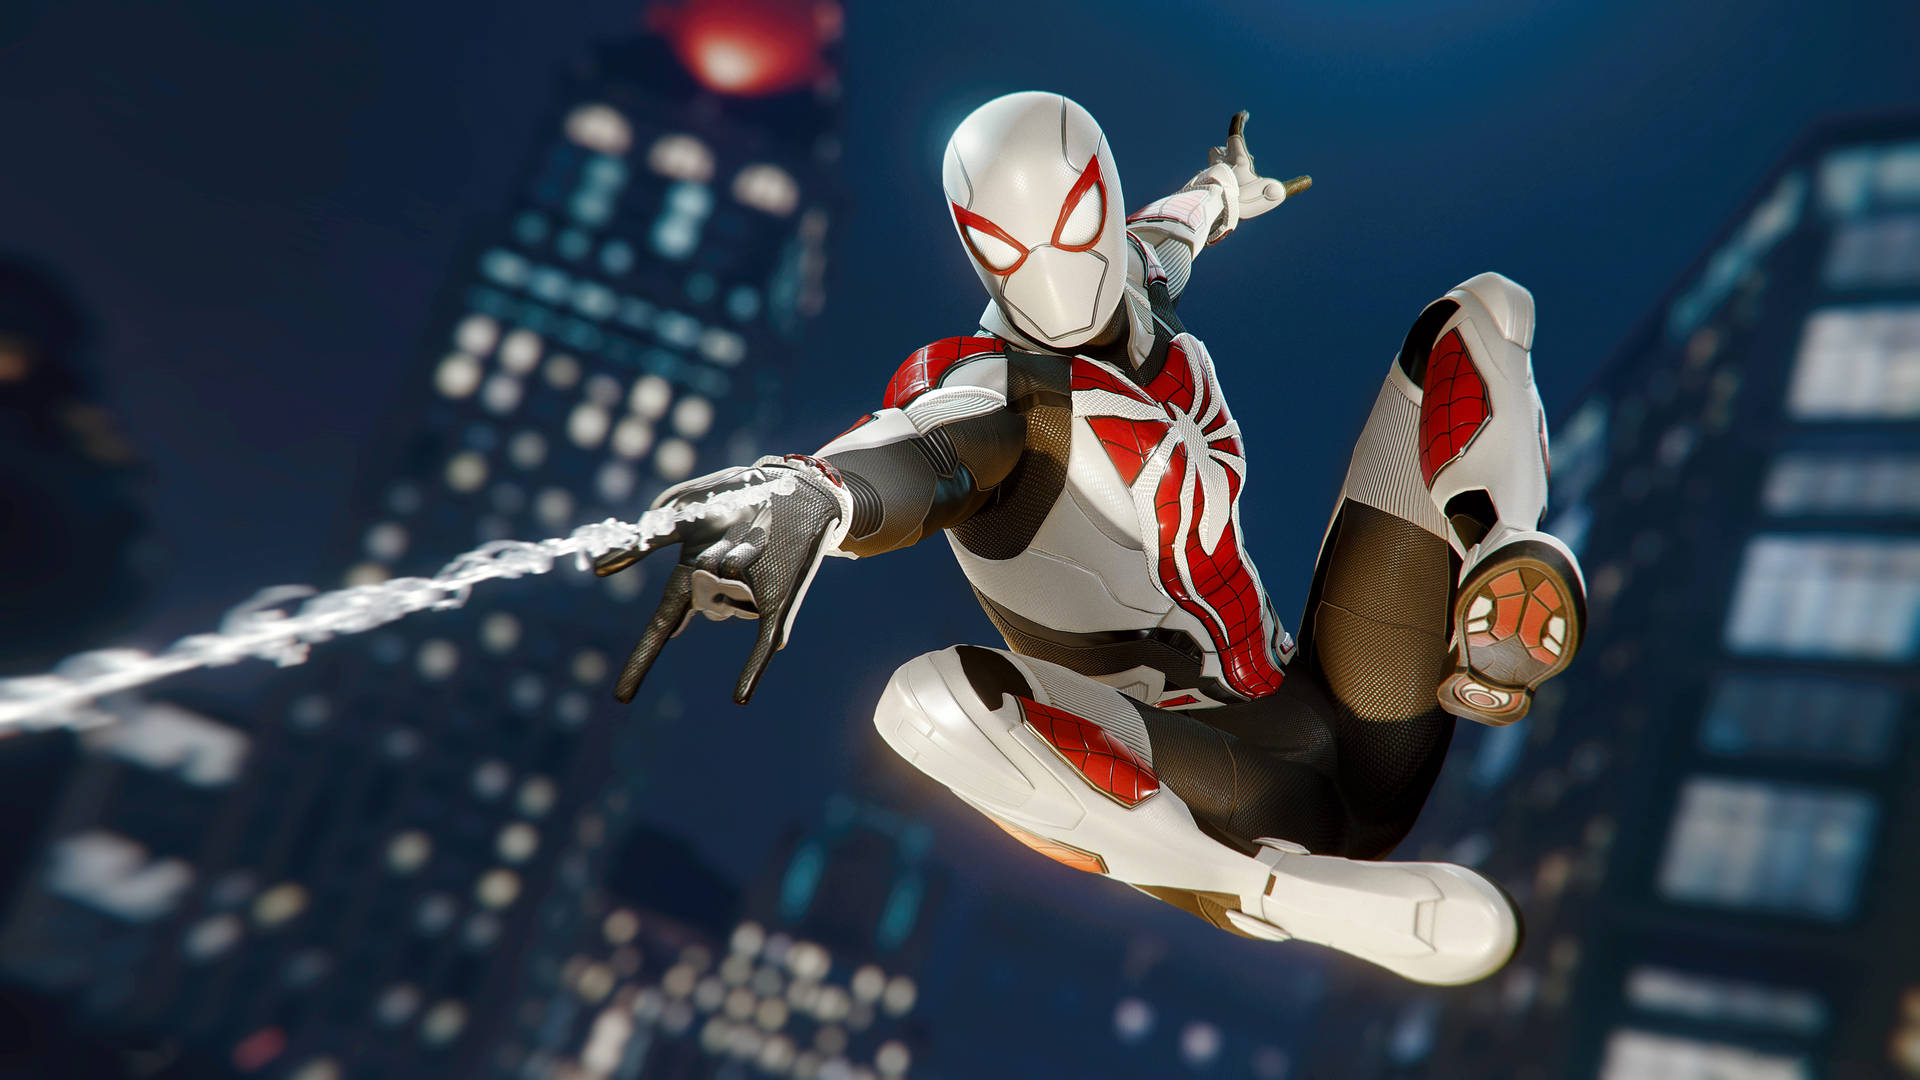 https://wallpapers.com/images/featured/spider-man-miles-morales-ps5-pictures-5ej76y1vskny2t7m.jpg